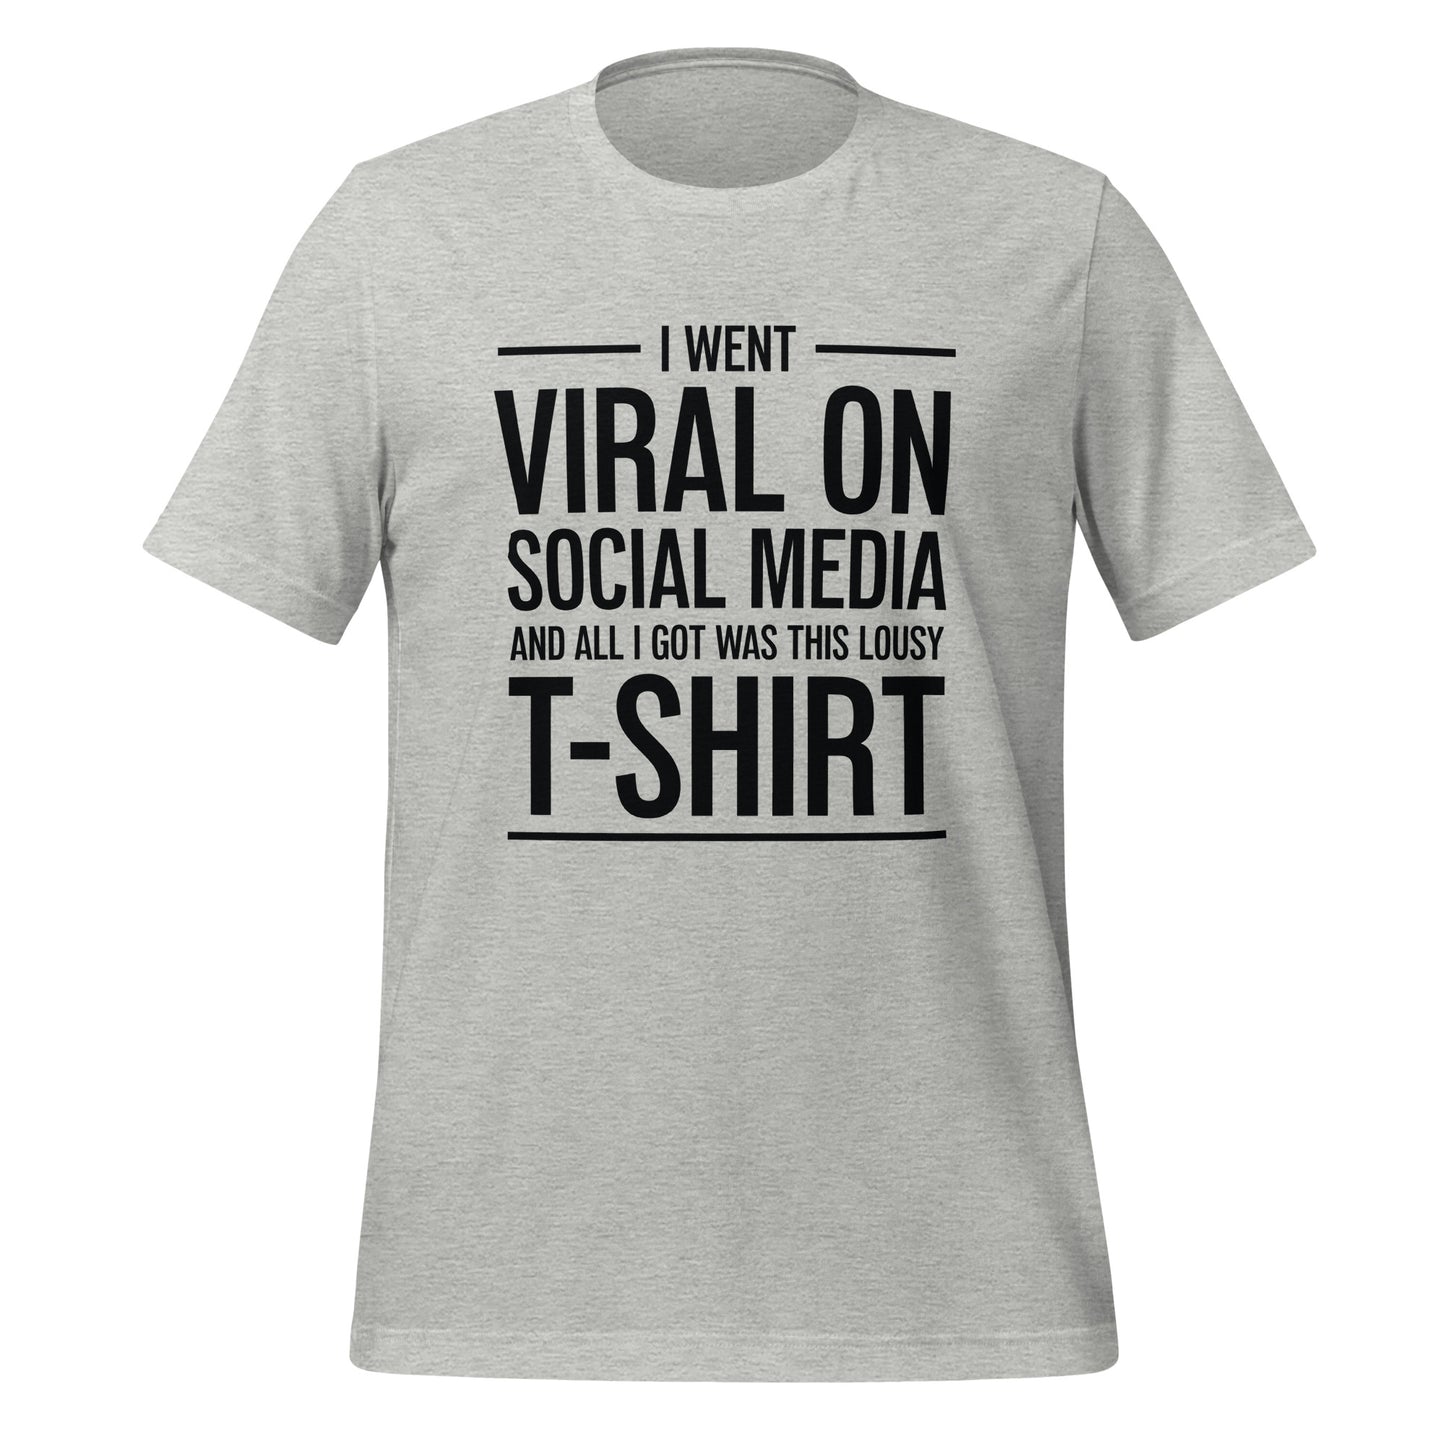 A shirt that reads, "I went viral on social media and all I got was this lousy t-shirt."